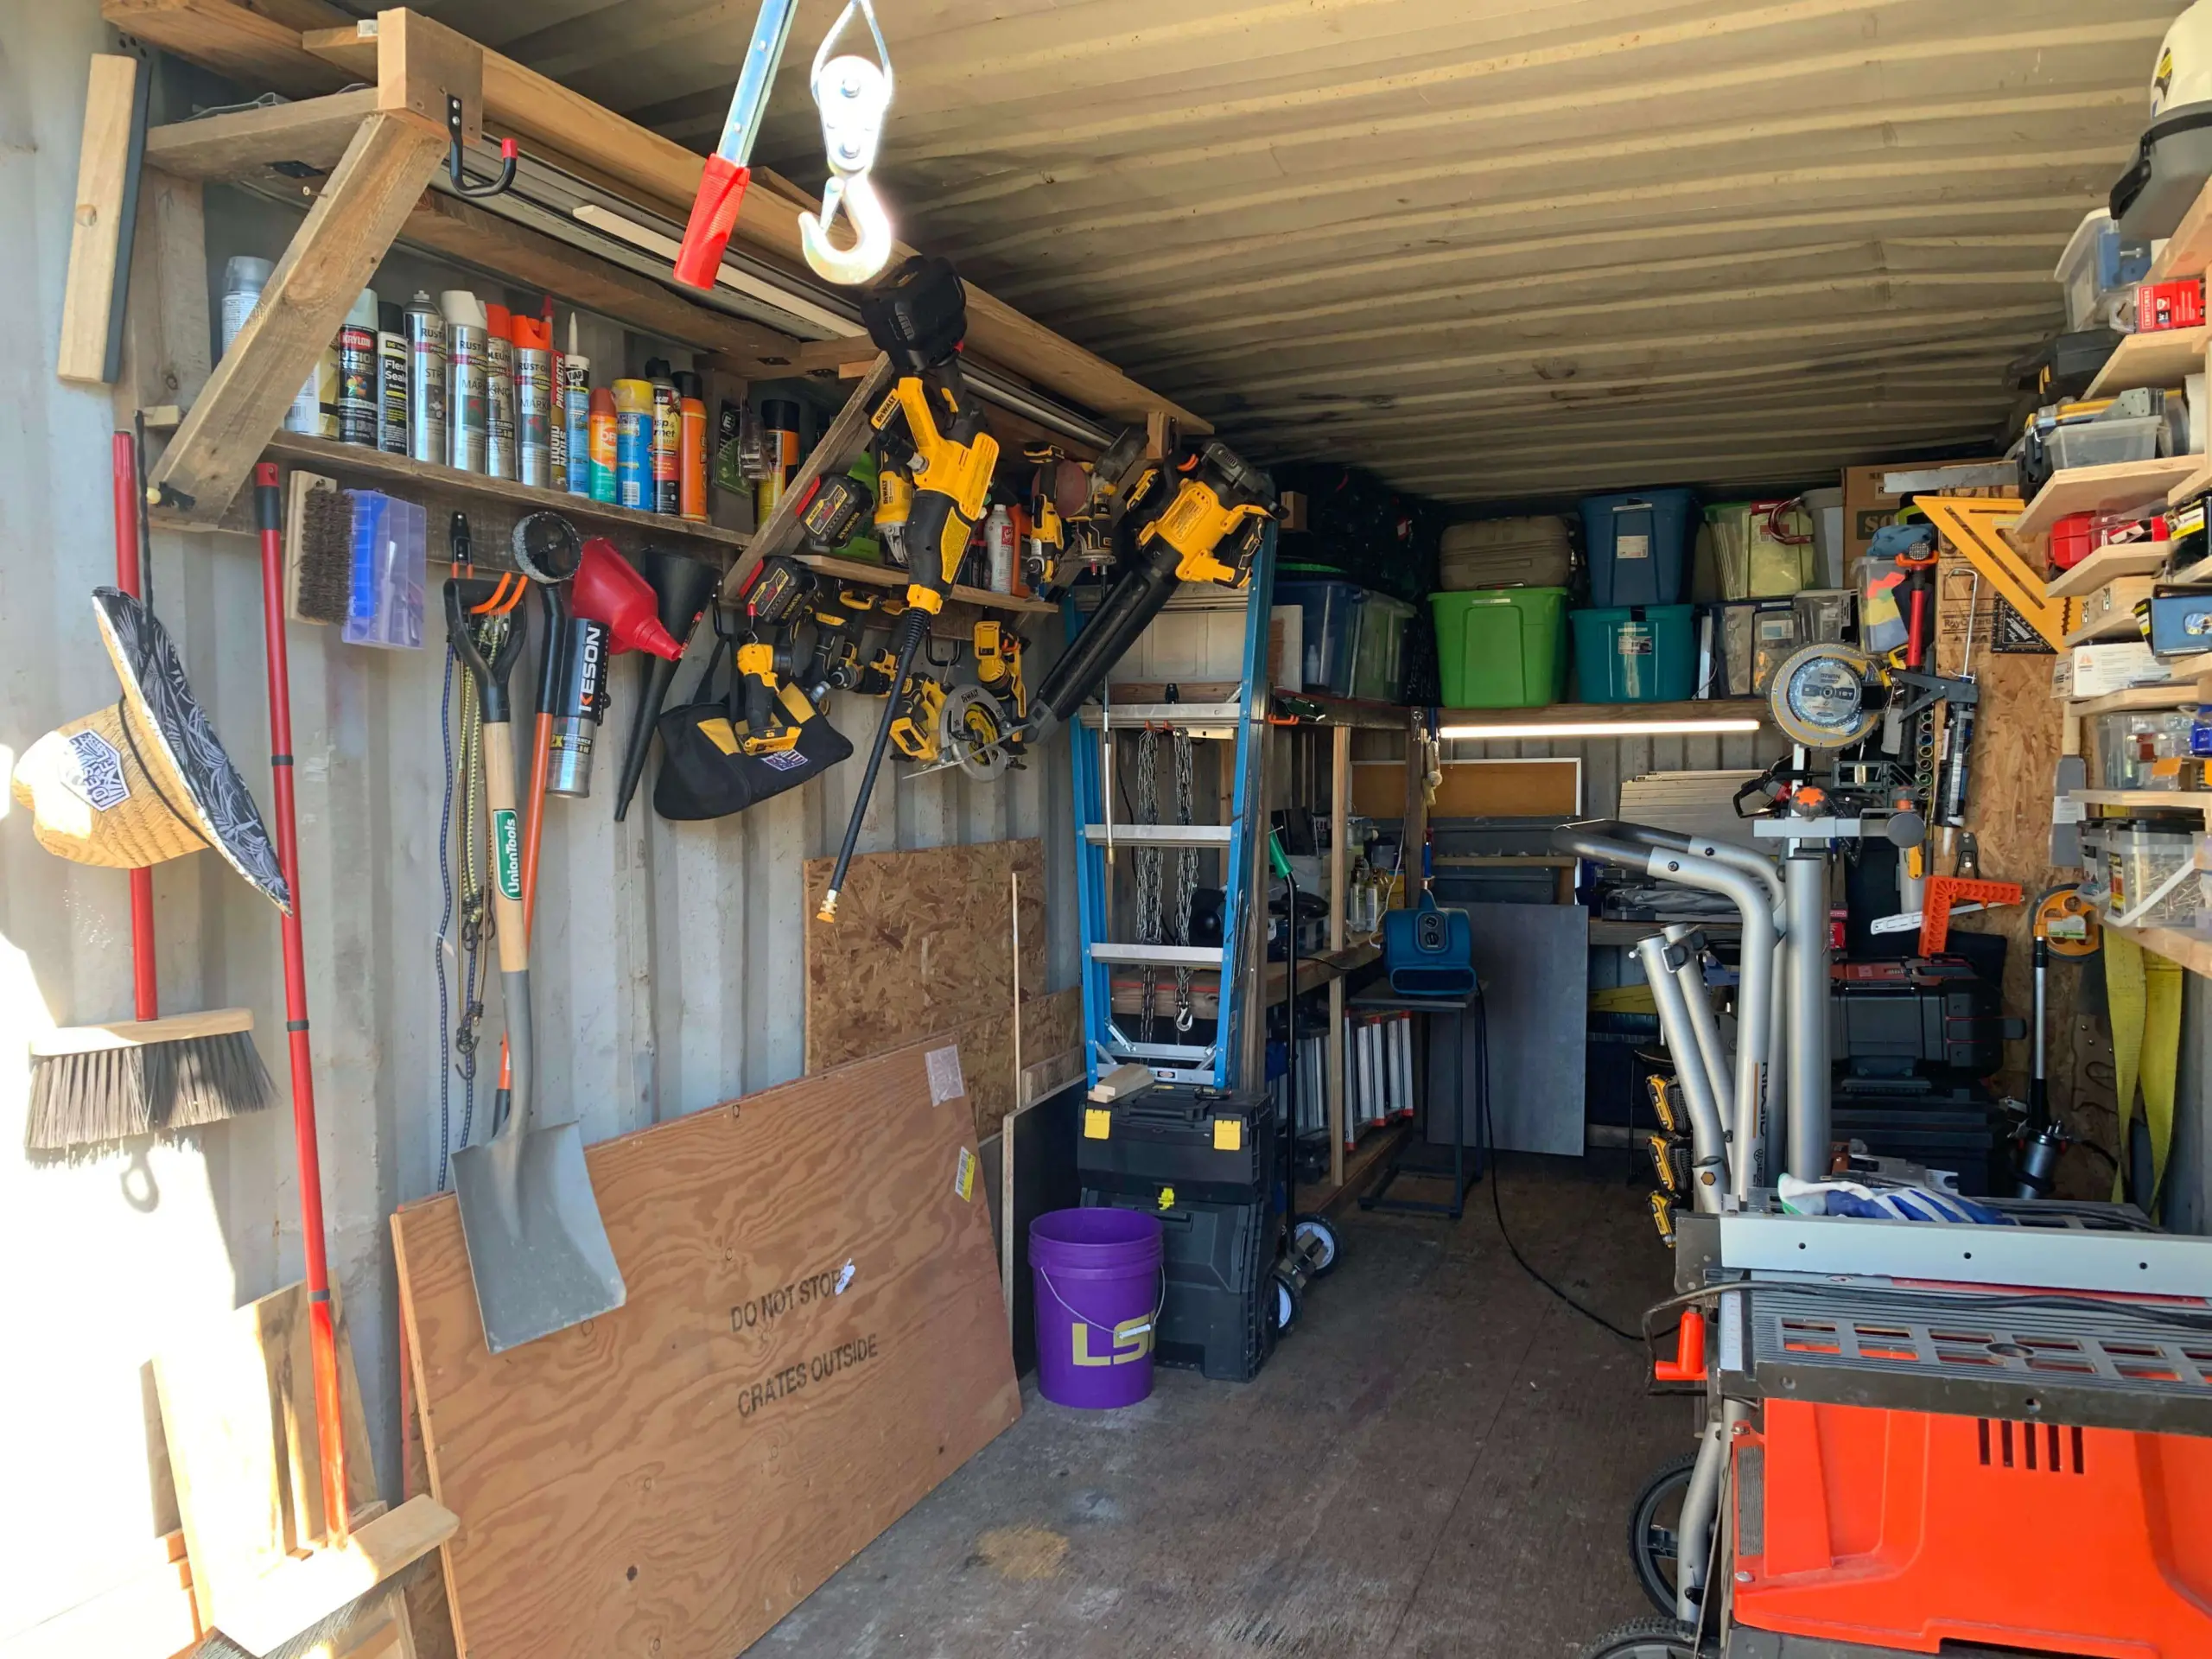 How Shipping Containers Can Transform Your Storage Space: From Cluttered to Organized